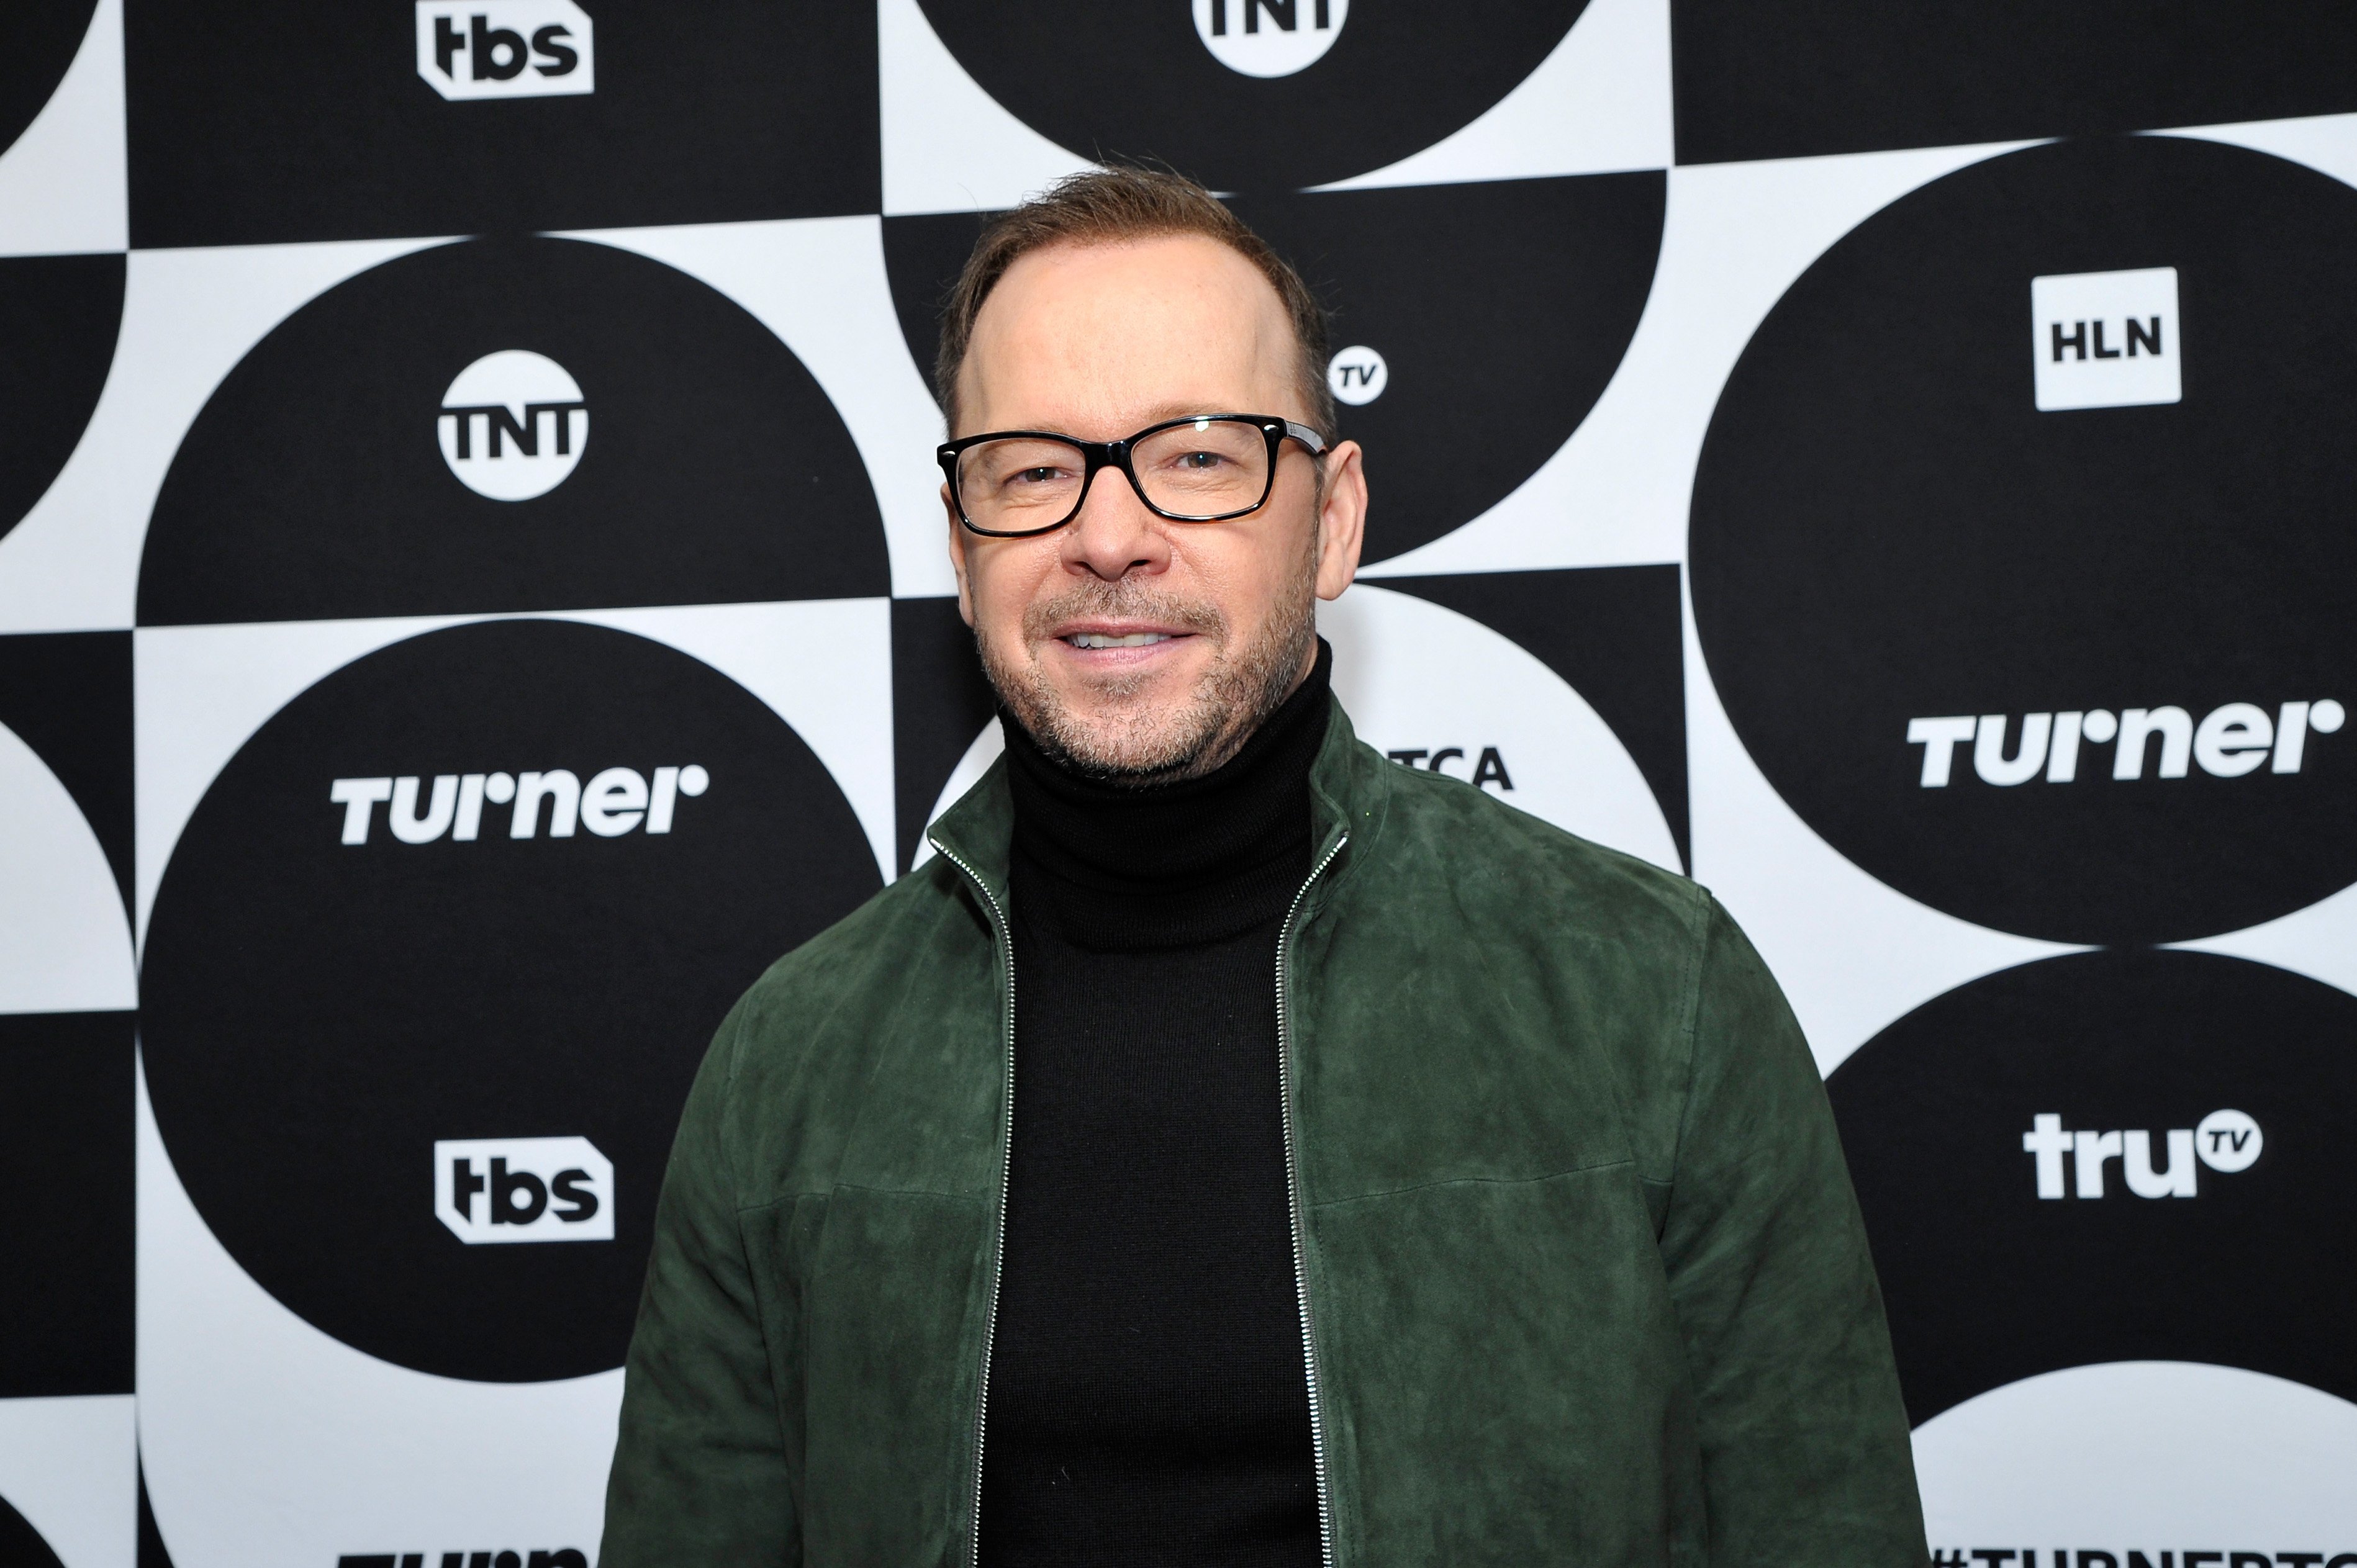 Donnie Wahlberg during the TCA Turner Winter Press Tour 2019 on February 11, 2019 | Photo: Getty Images